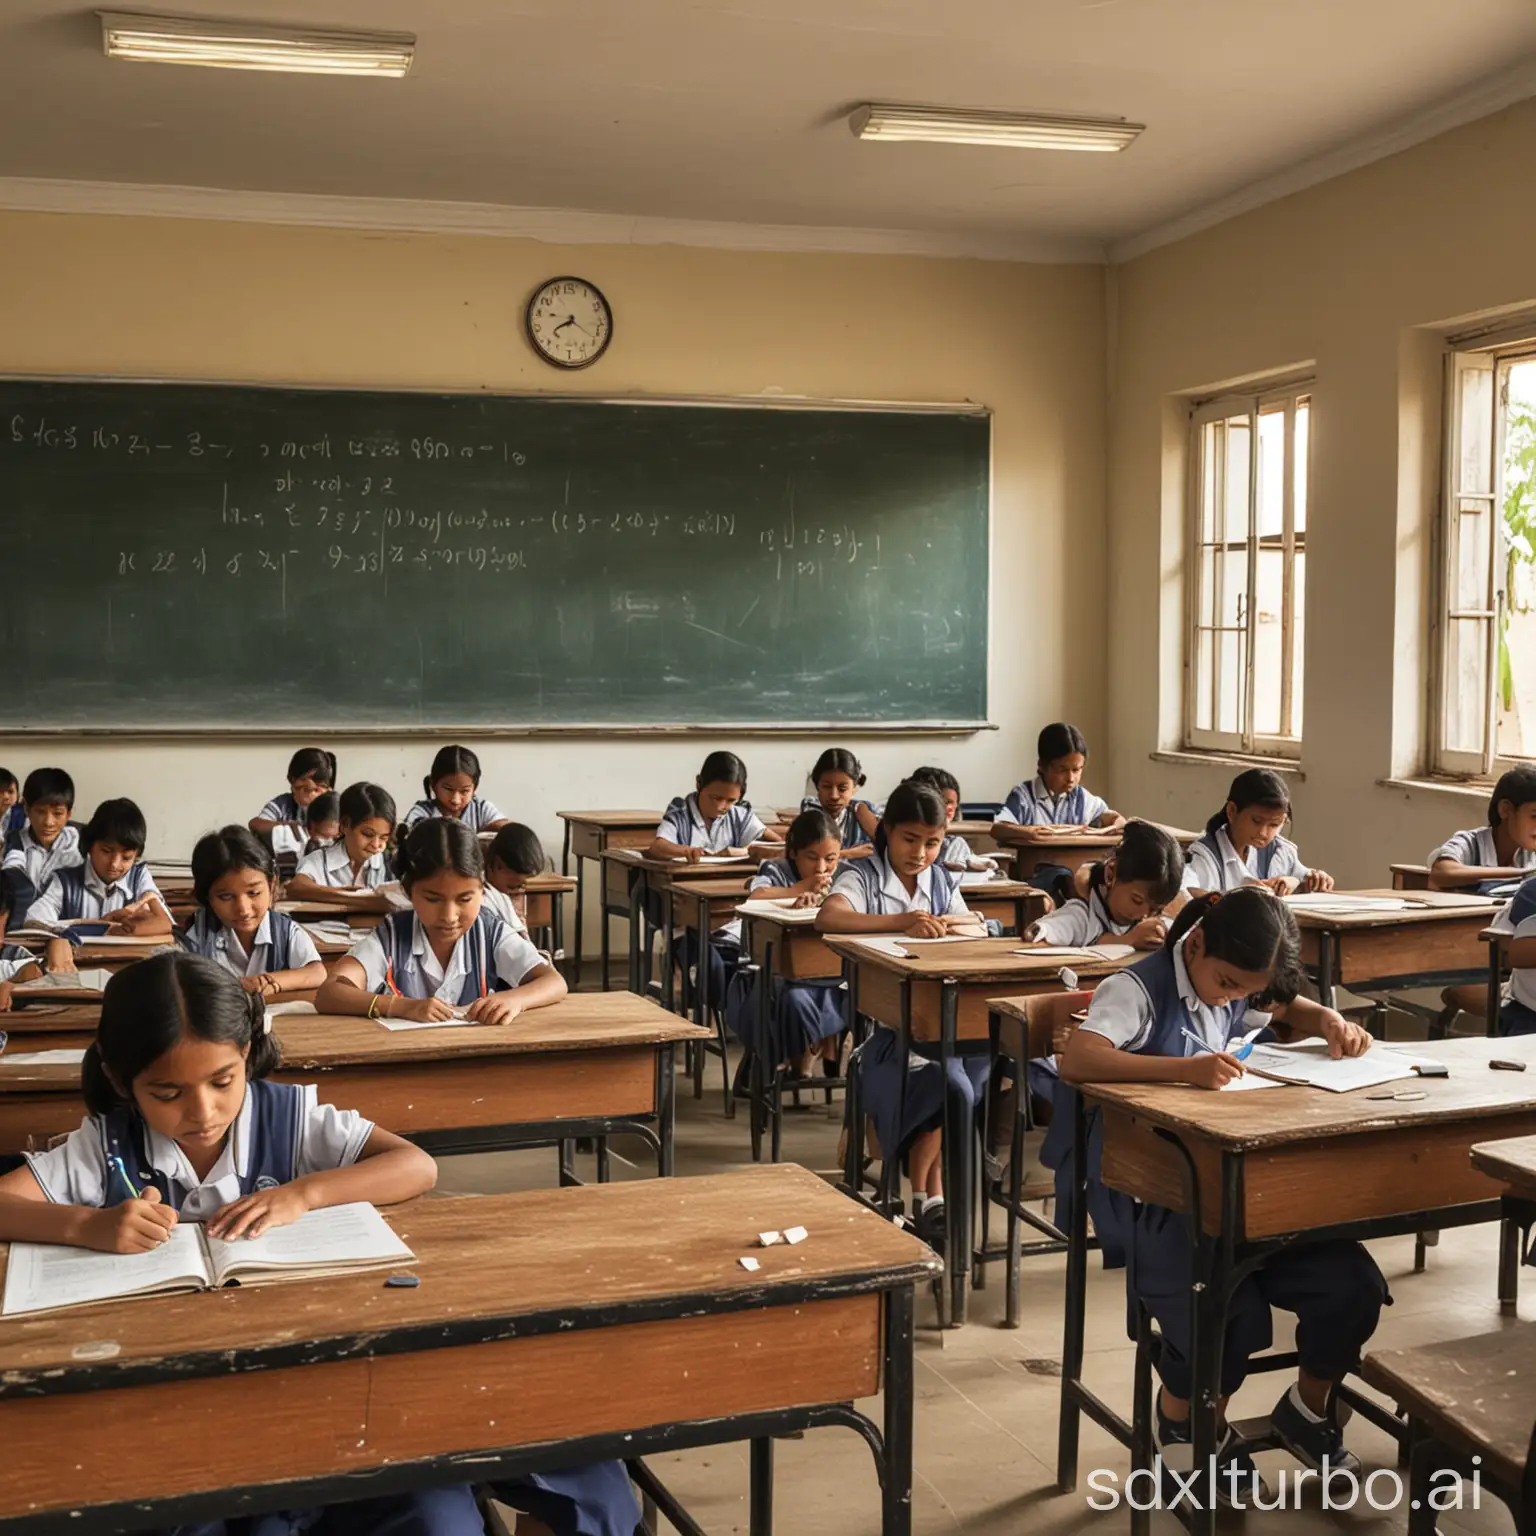 A class room where the children are engaged and working hard, while the teacher is teaching at the front of the class.